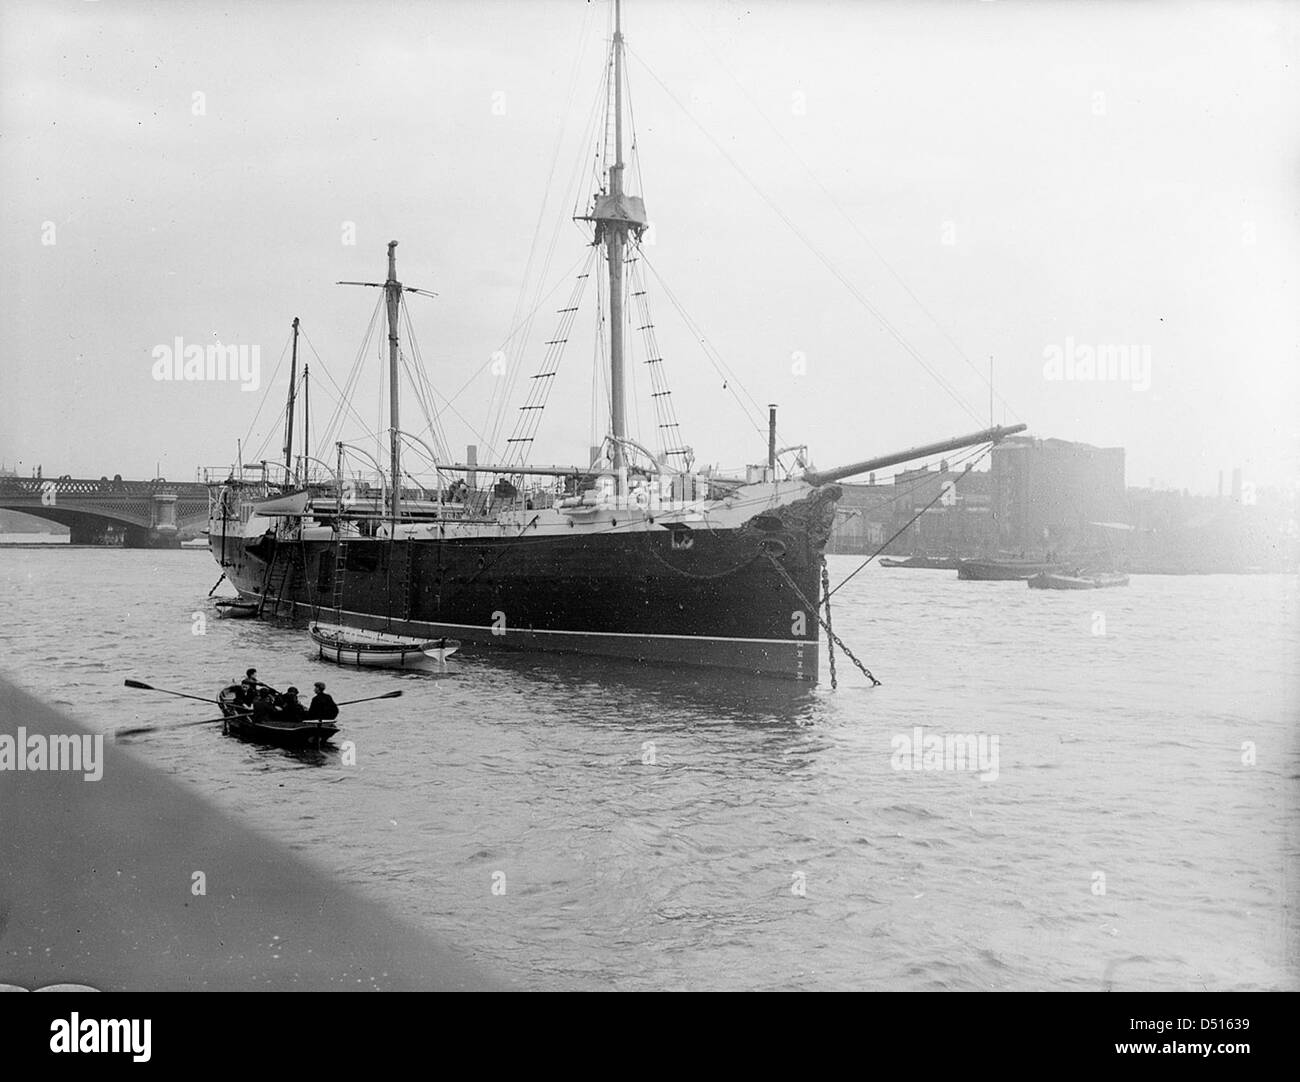 The RNVR Training Ship 'Buzzard' moored in the River Thames at the Embankment Stock Photo